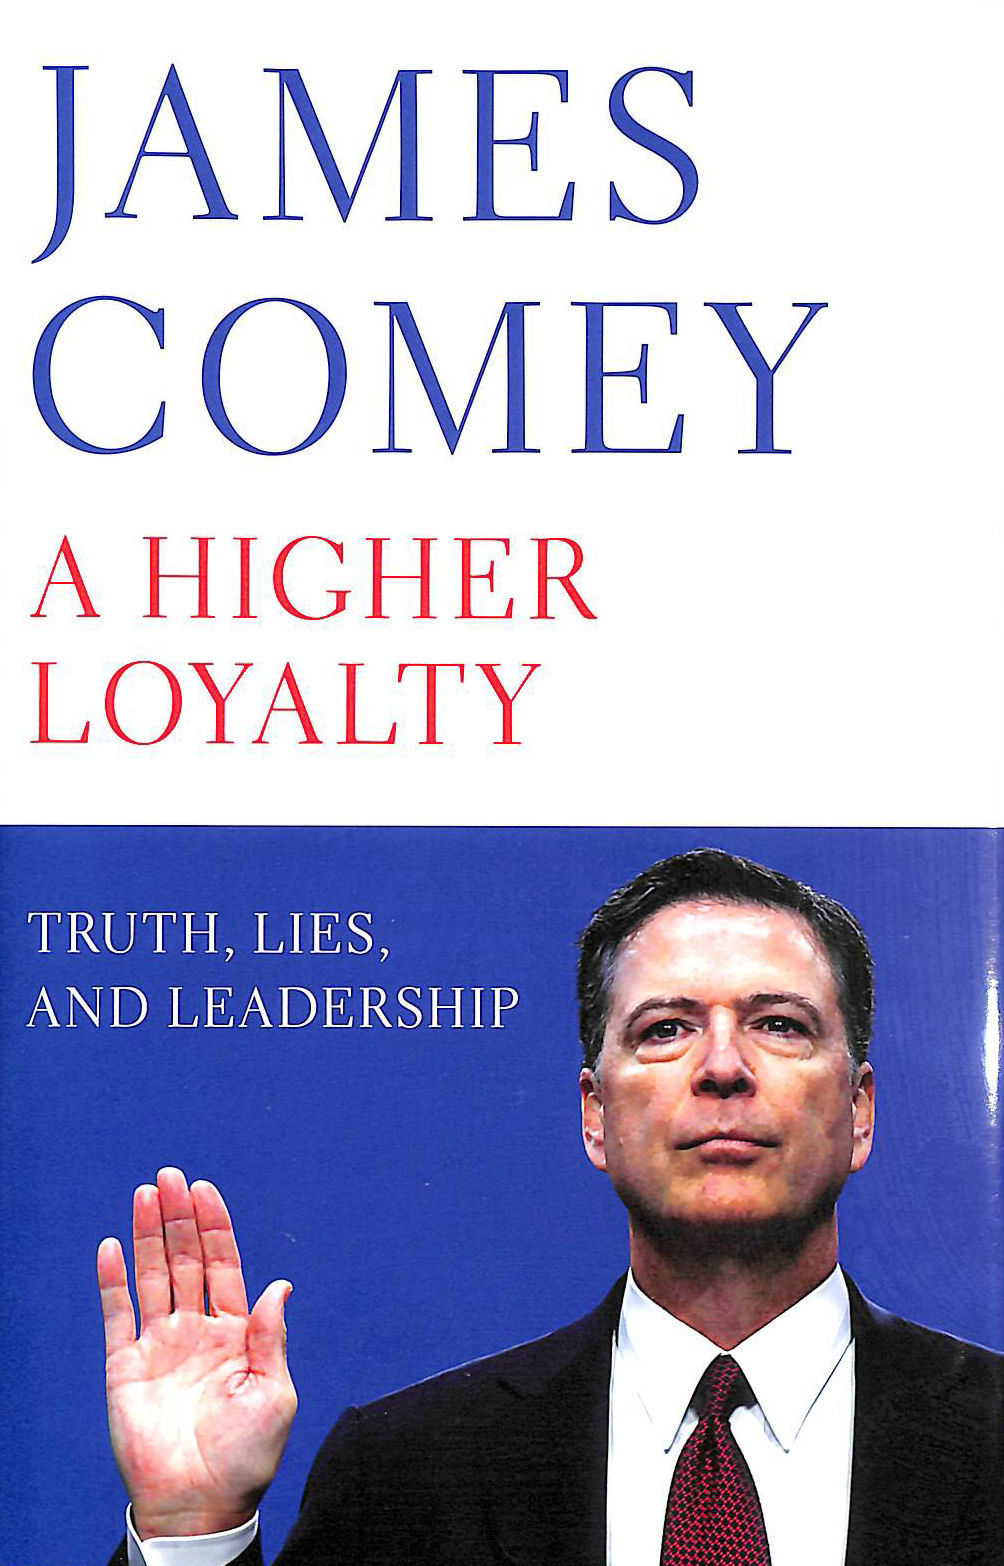 COMEY, JAMES - A Higher Loyalty: Truth, Lies, and Leadership